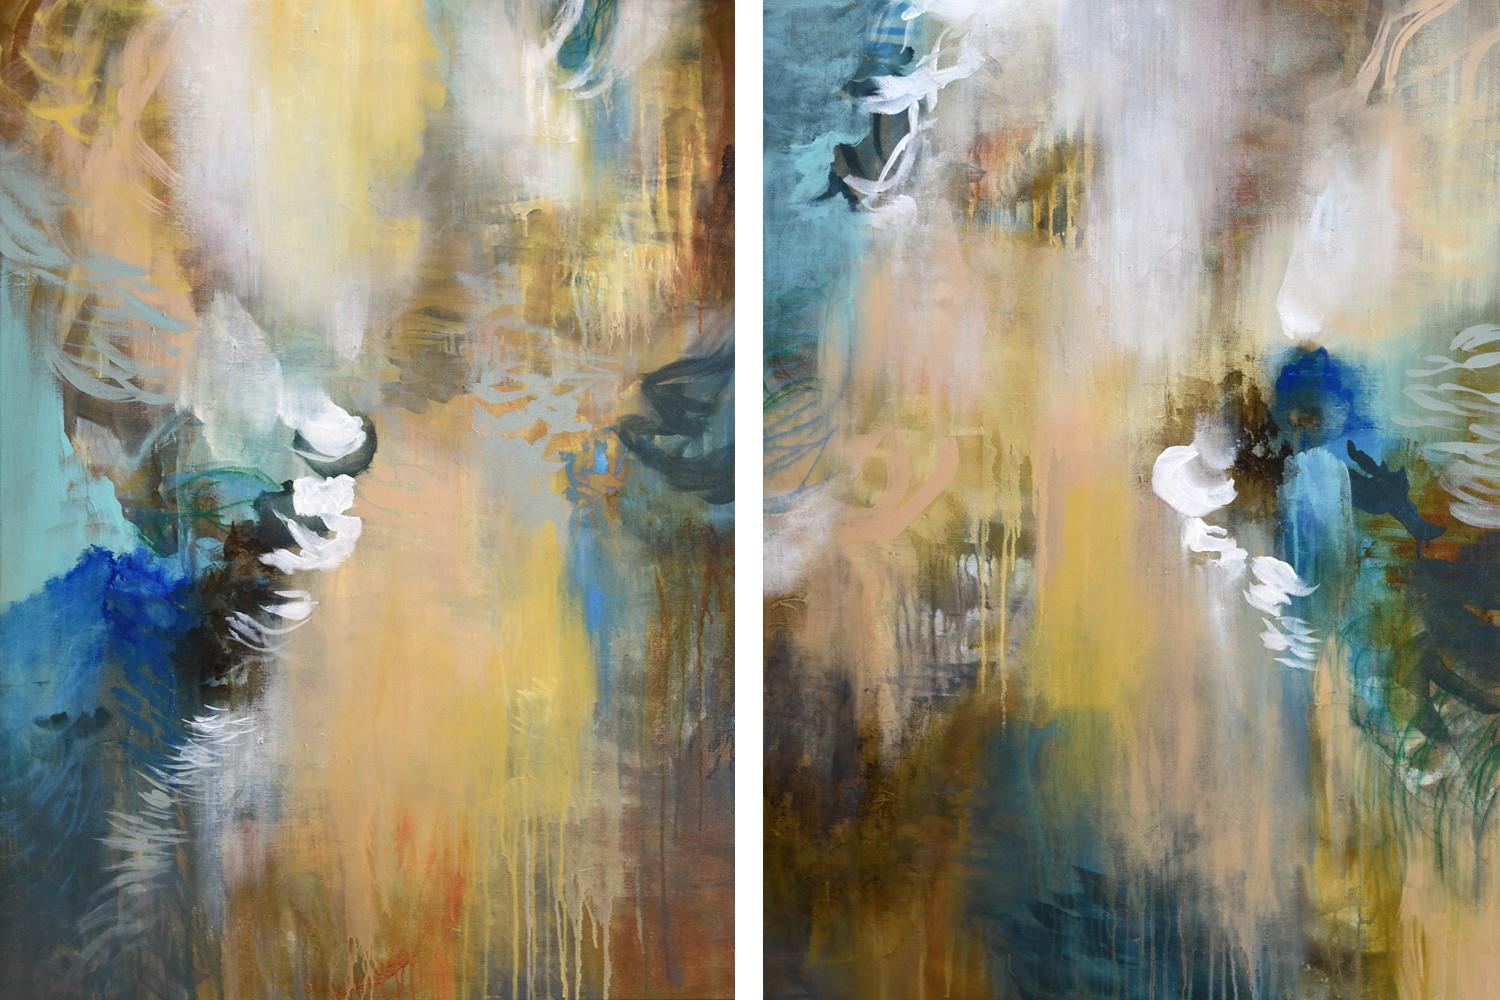 Cat Tesla
"Chrysalis No.256 & 257"
Mixed Media on Canvas
48" x 1.5" x 34" EACH
Signed and titled on back of paintings
More images available upon request 

"My work includes both ethereal landscapes and abstract designs. The subjects I choose to